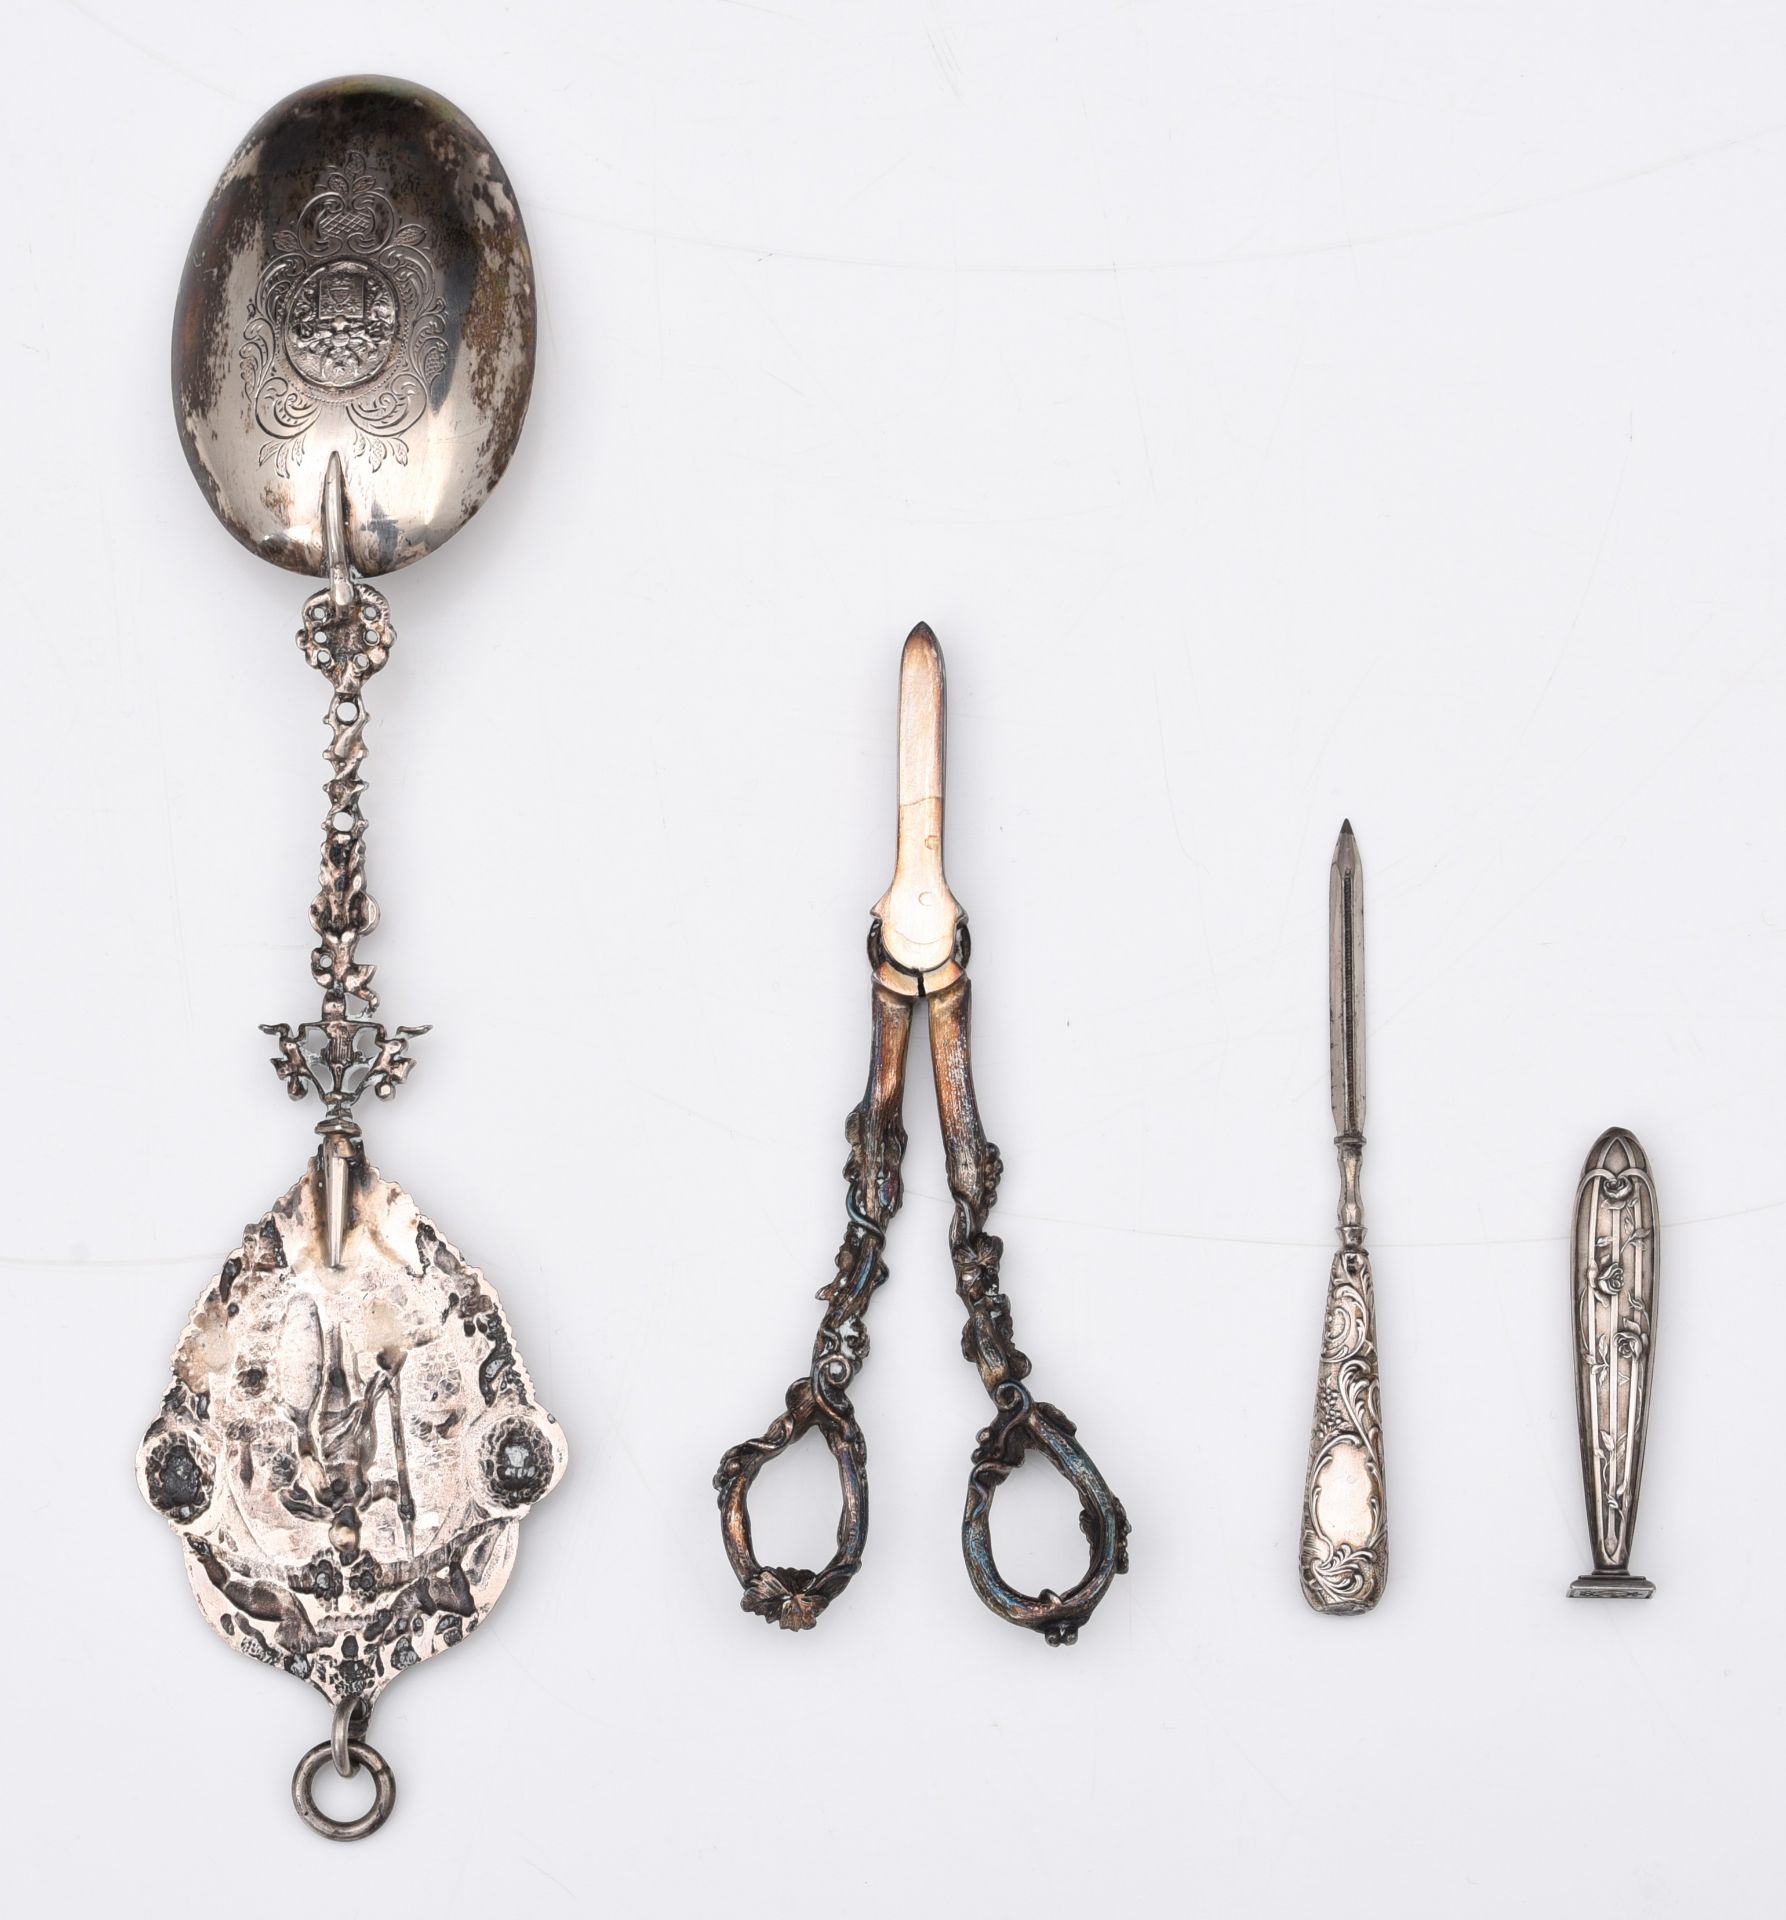 A collection of silver and silvered objects, total weight: 630g, H 5 - 20,5 cm - Bild 13 aus 41